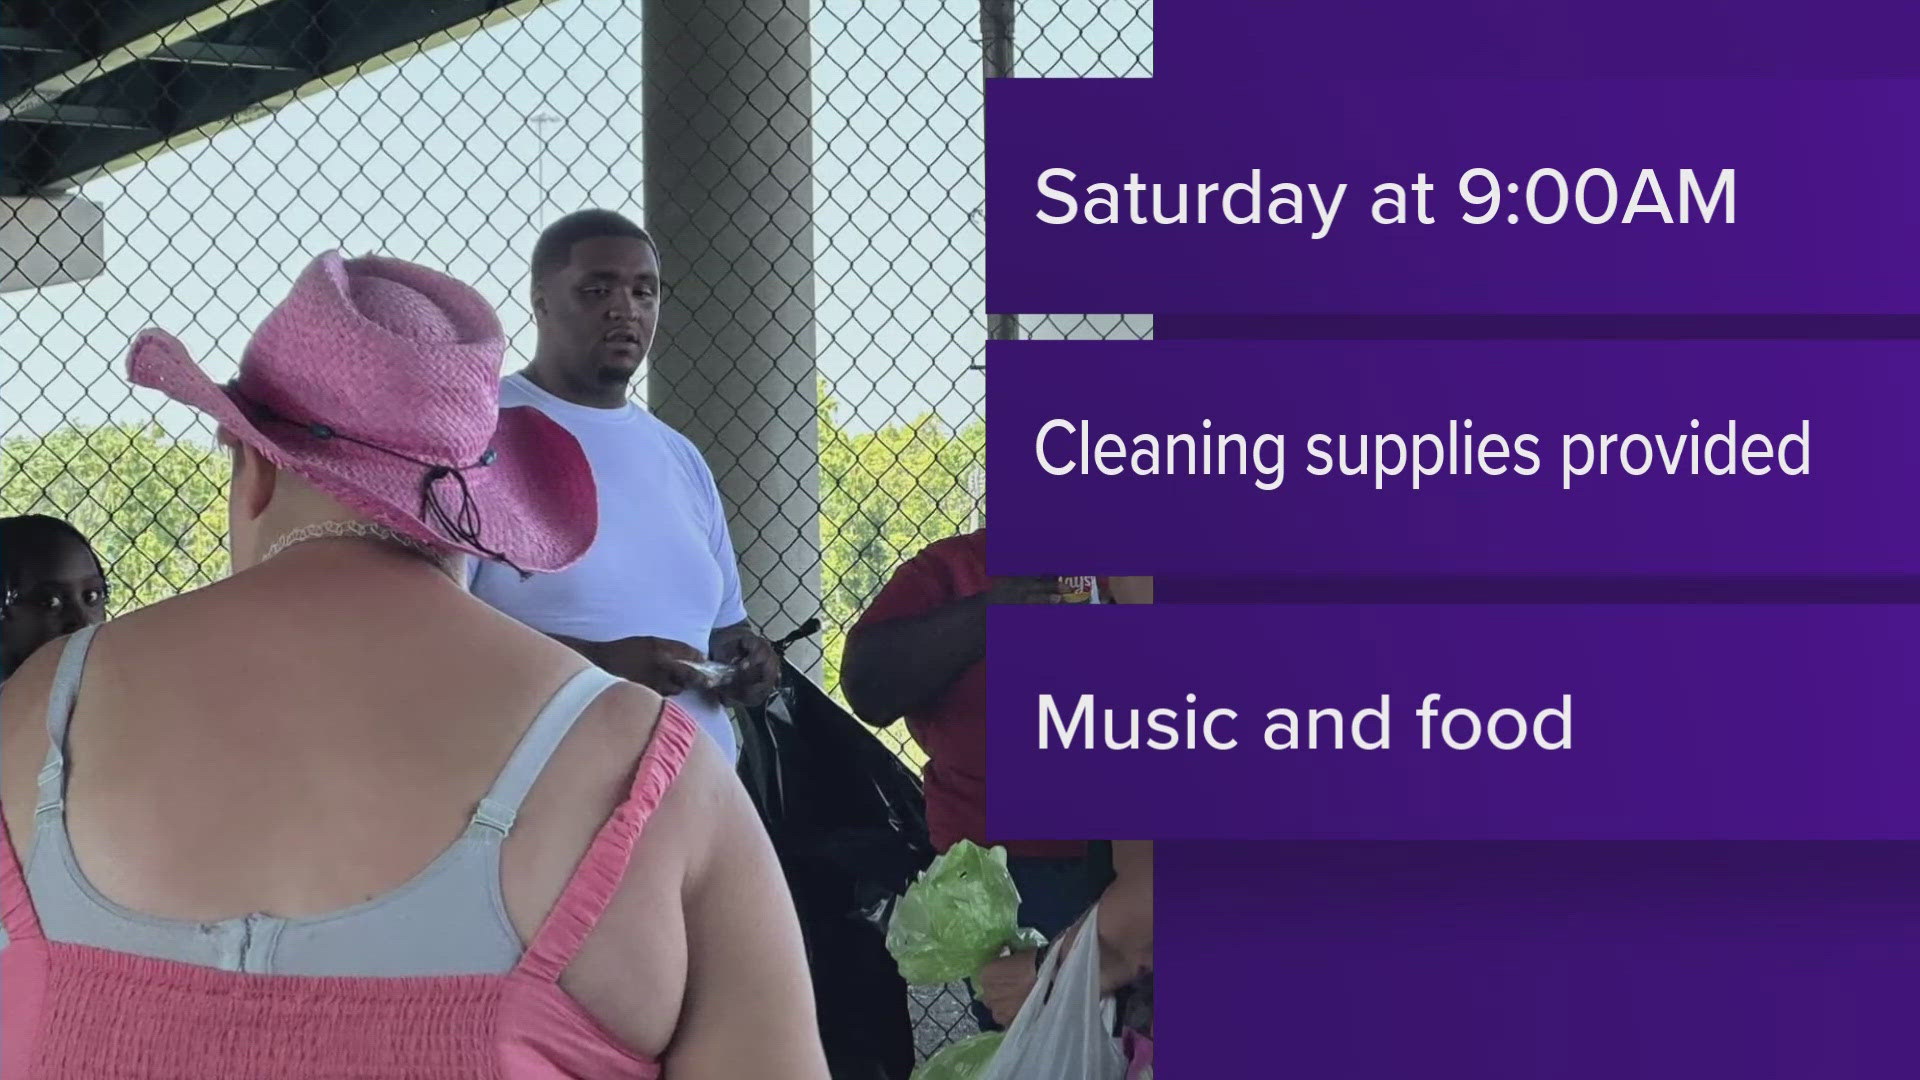 The Five Points Up Coalition will host the community cleanup. It is meant to bring neighbors together and to clear litter and trash from waterways.